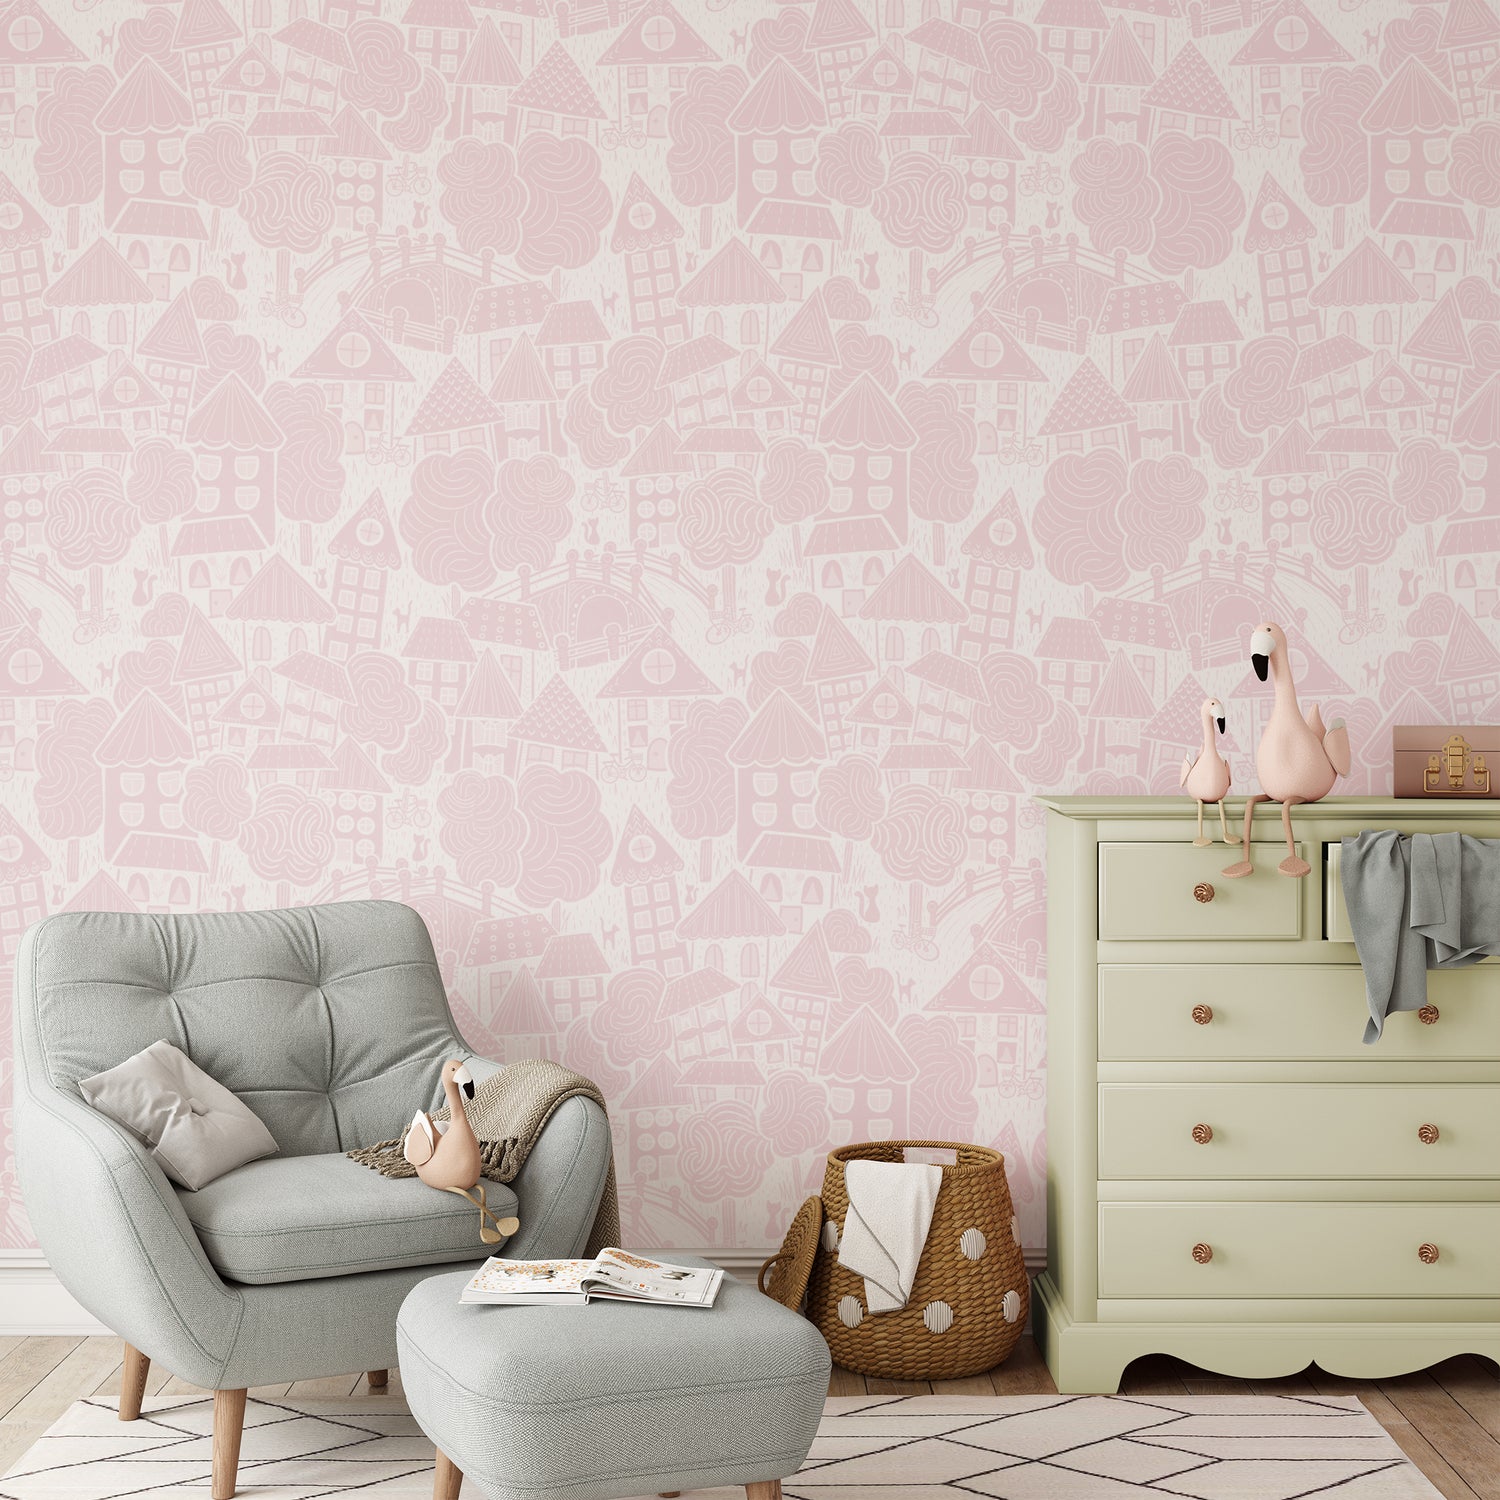 Houses Wallpaper in Pink shown in a nursery.